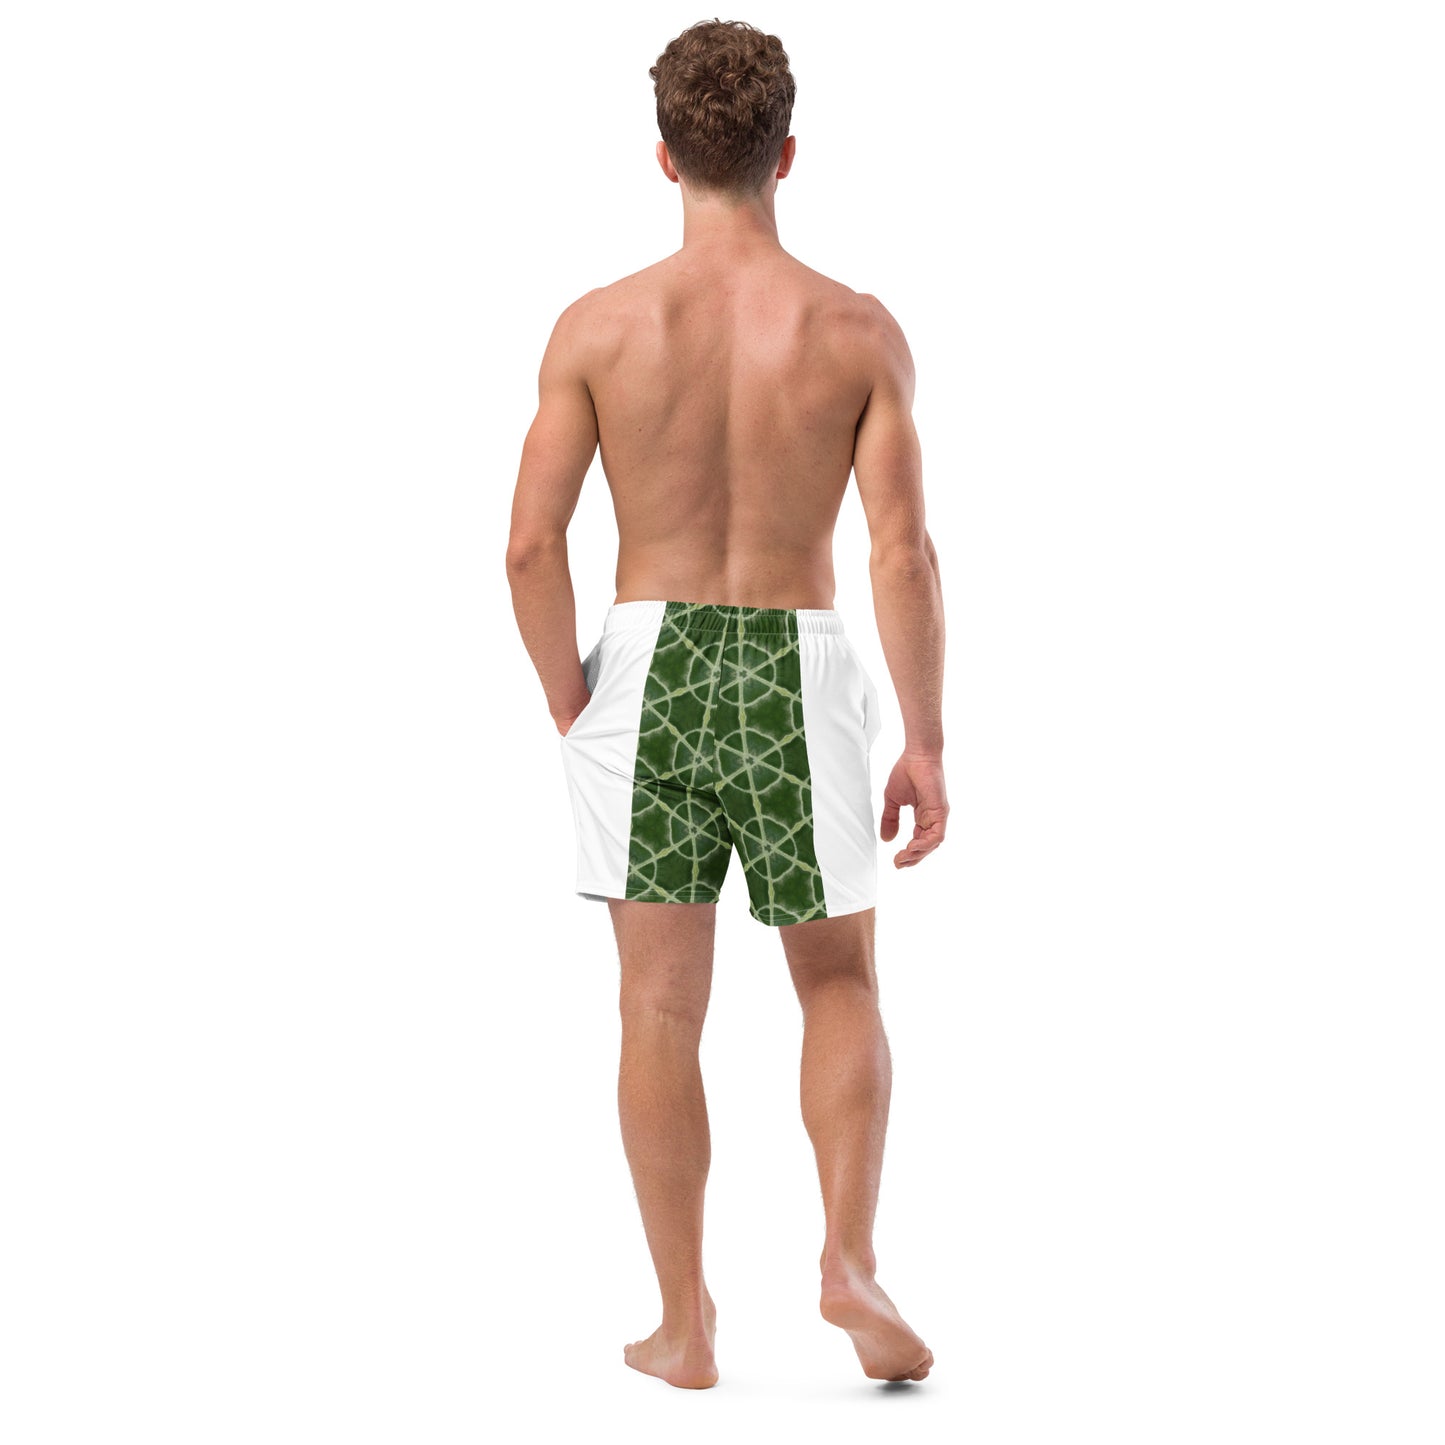 Abstract Men's swim trunks - O By Onica Online Store